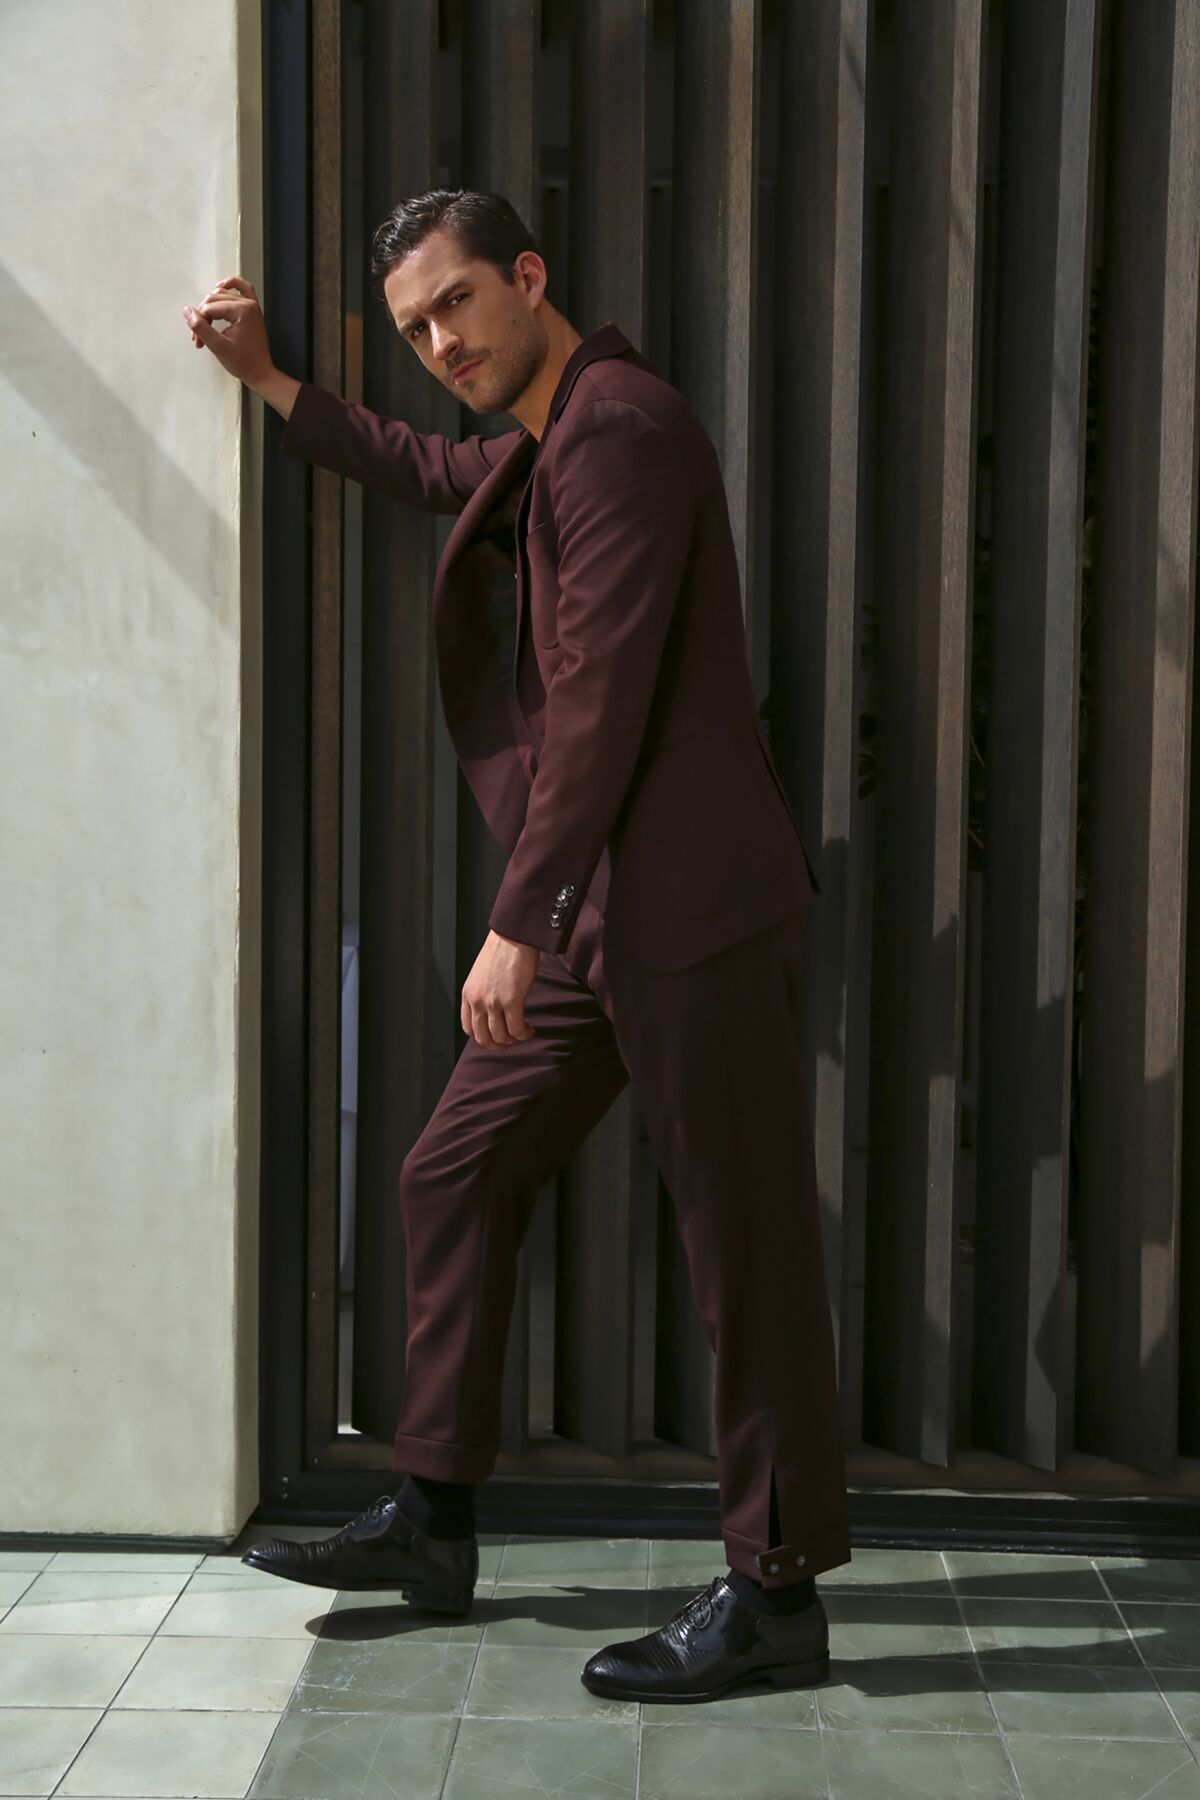 A man in a plum-colored suit stands leaning with one hand against a wall.